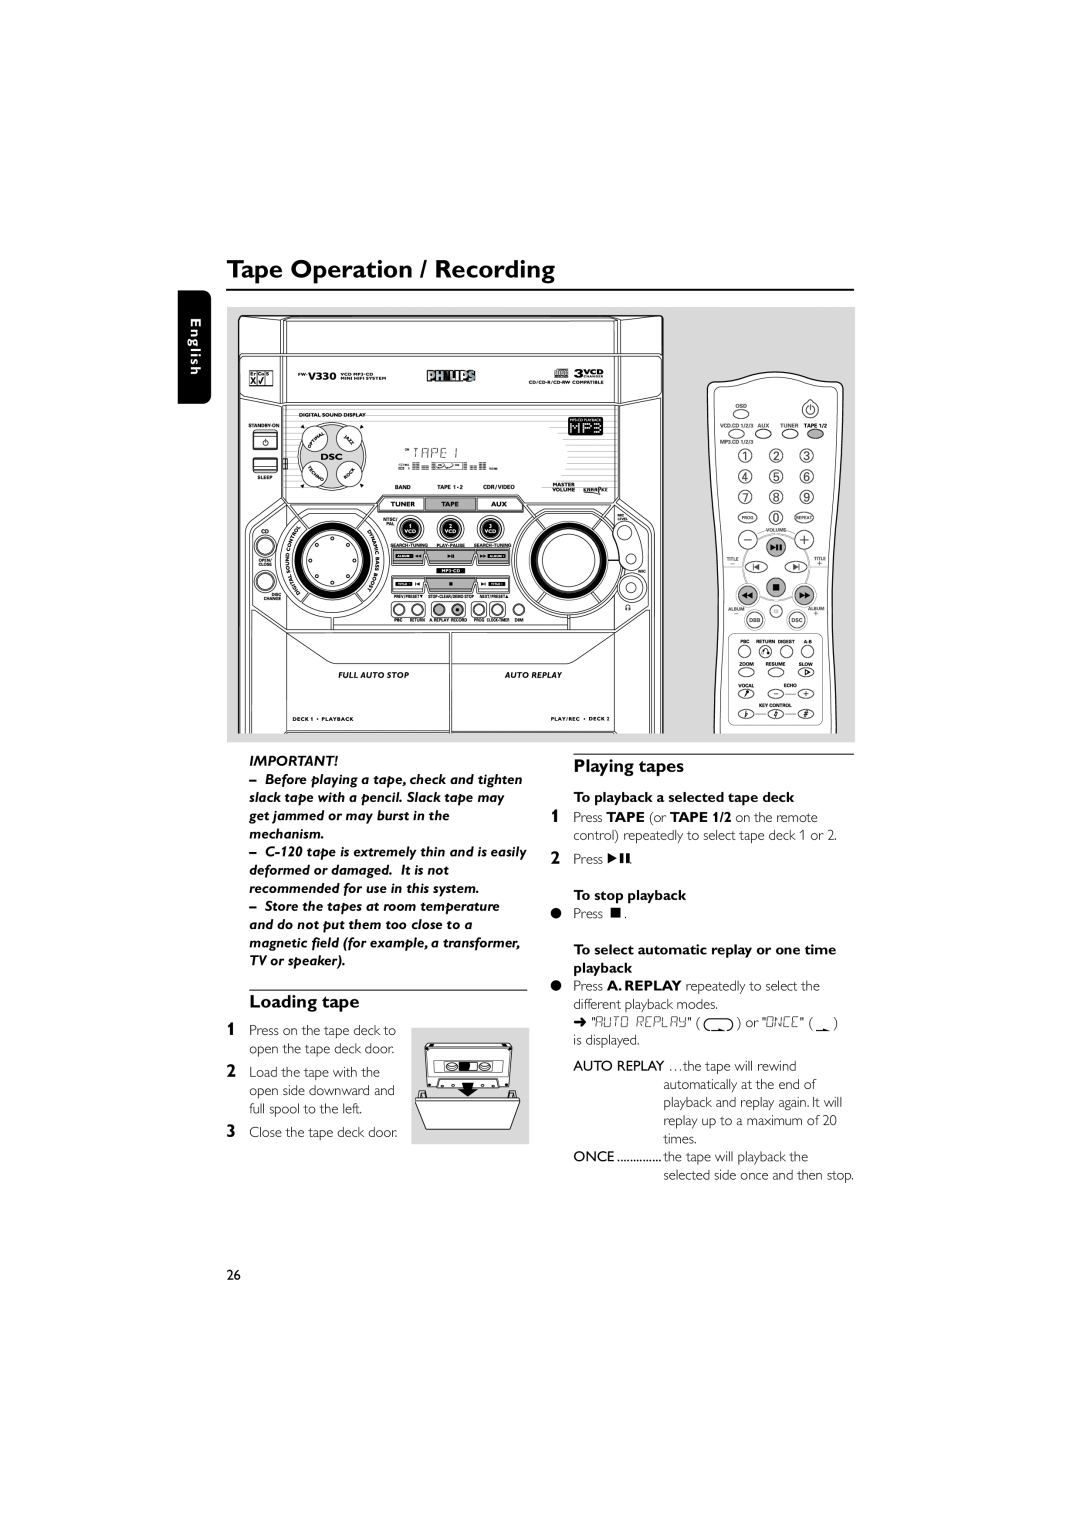 Philips FW-V330 manual Tape Operation / Recording, English, To playback a selected tape deck, To stop playback 